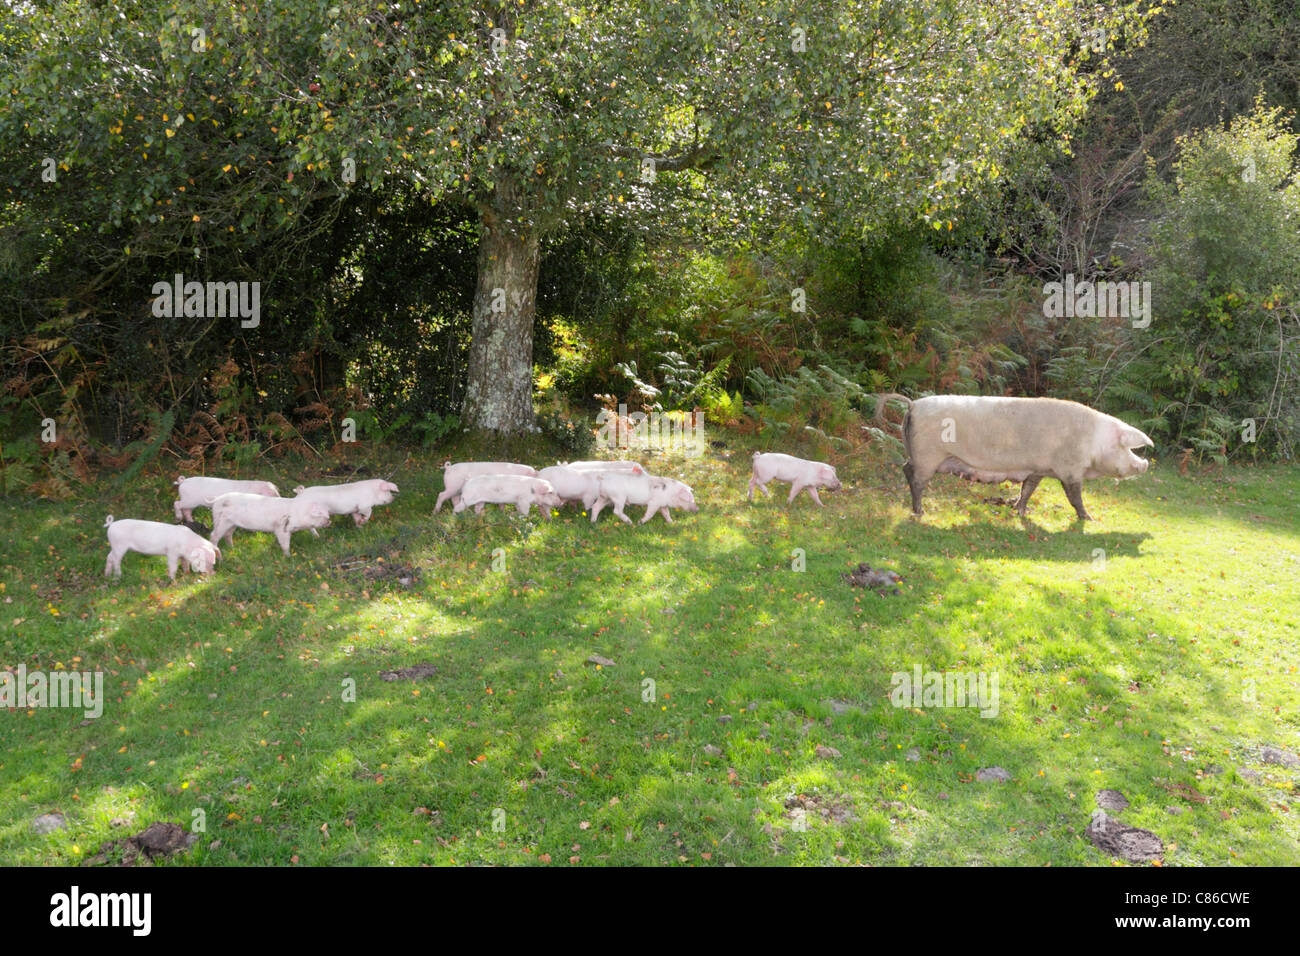 Pigs at pannage in New Forest, sow with litter foraging for acorns and fruit during two months of autumn pannage season. Stock Photo